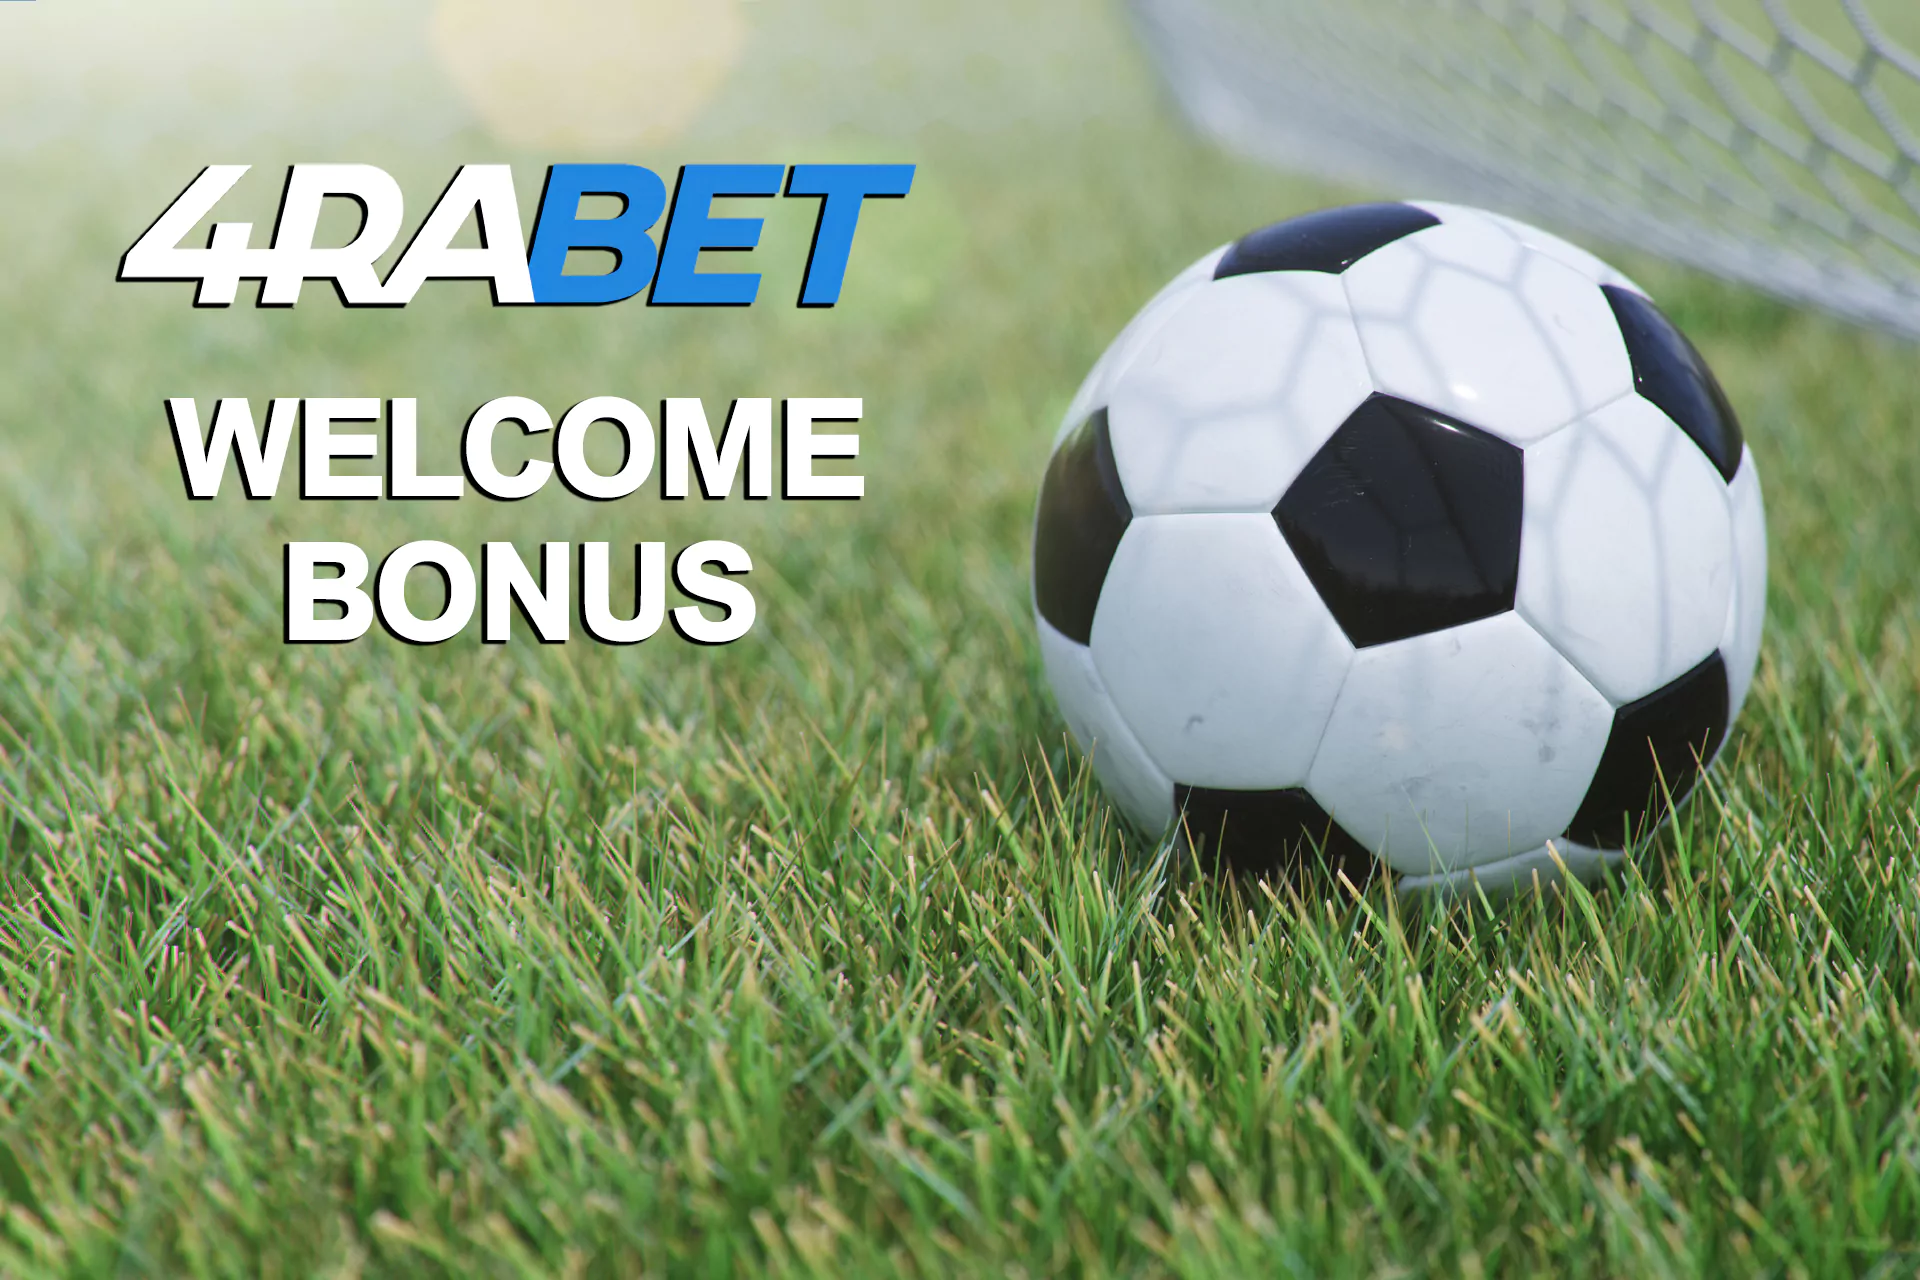 If you are a new user you can count on the welcome bonus for sports betting.